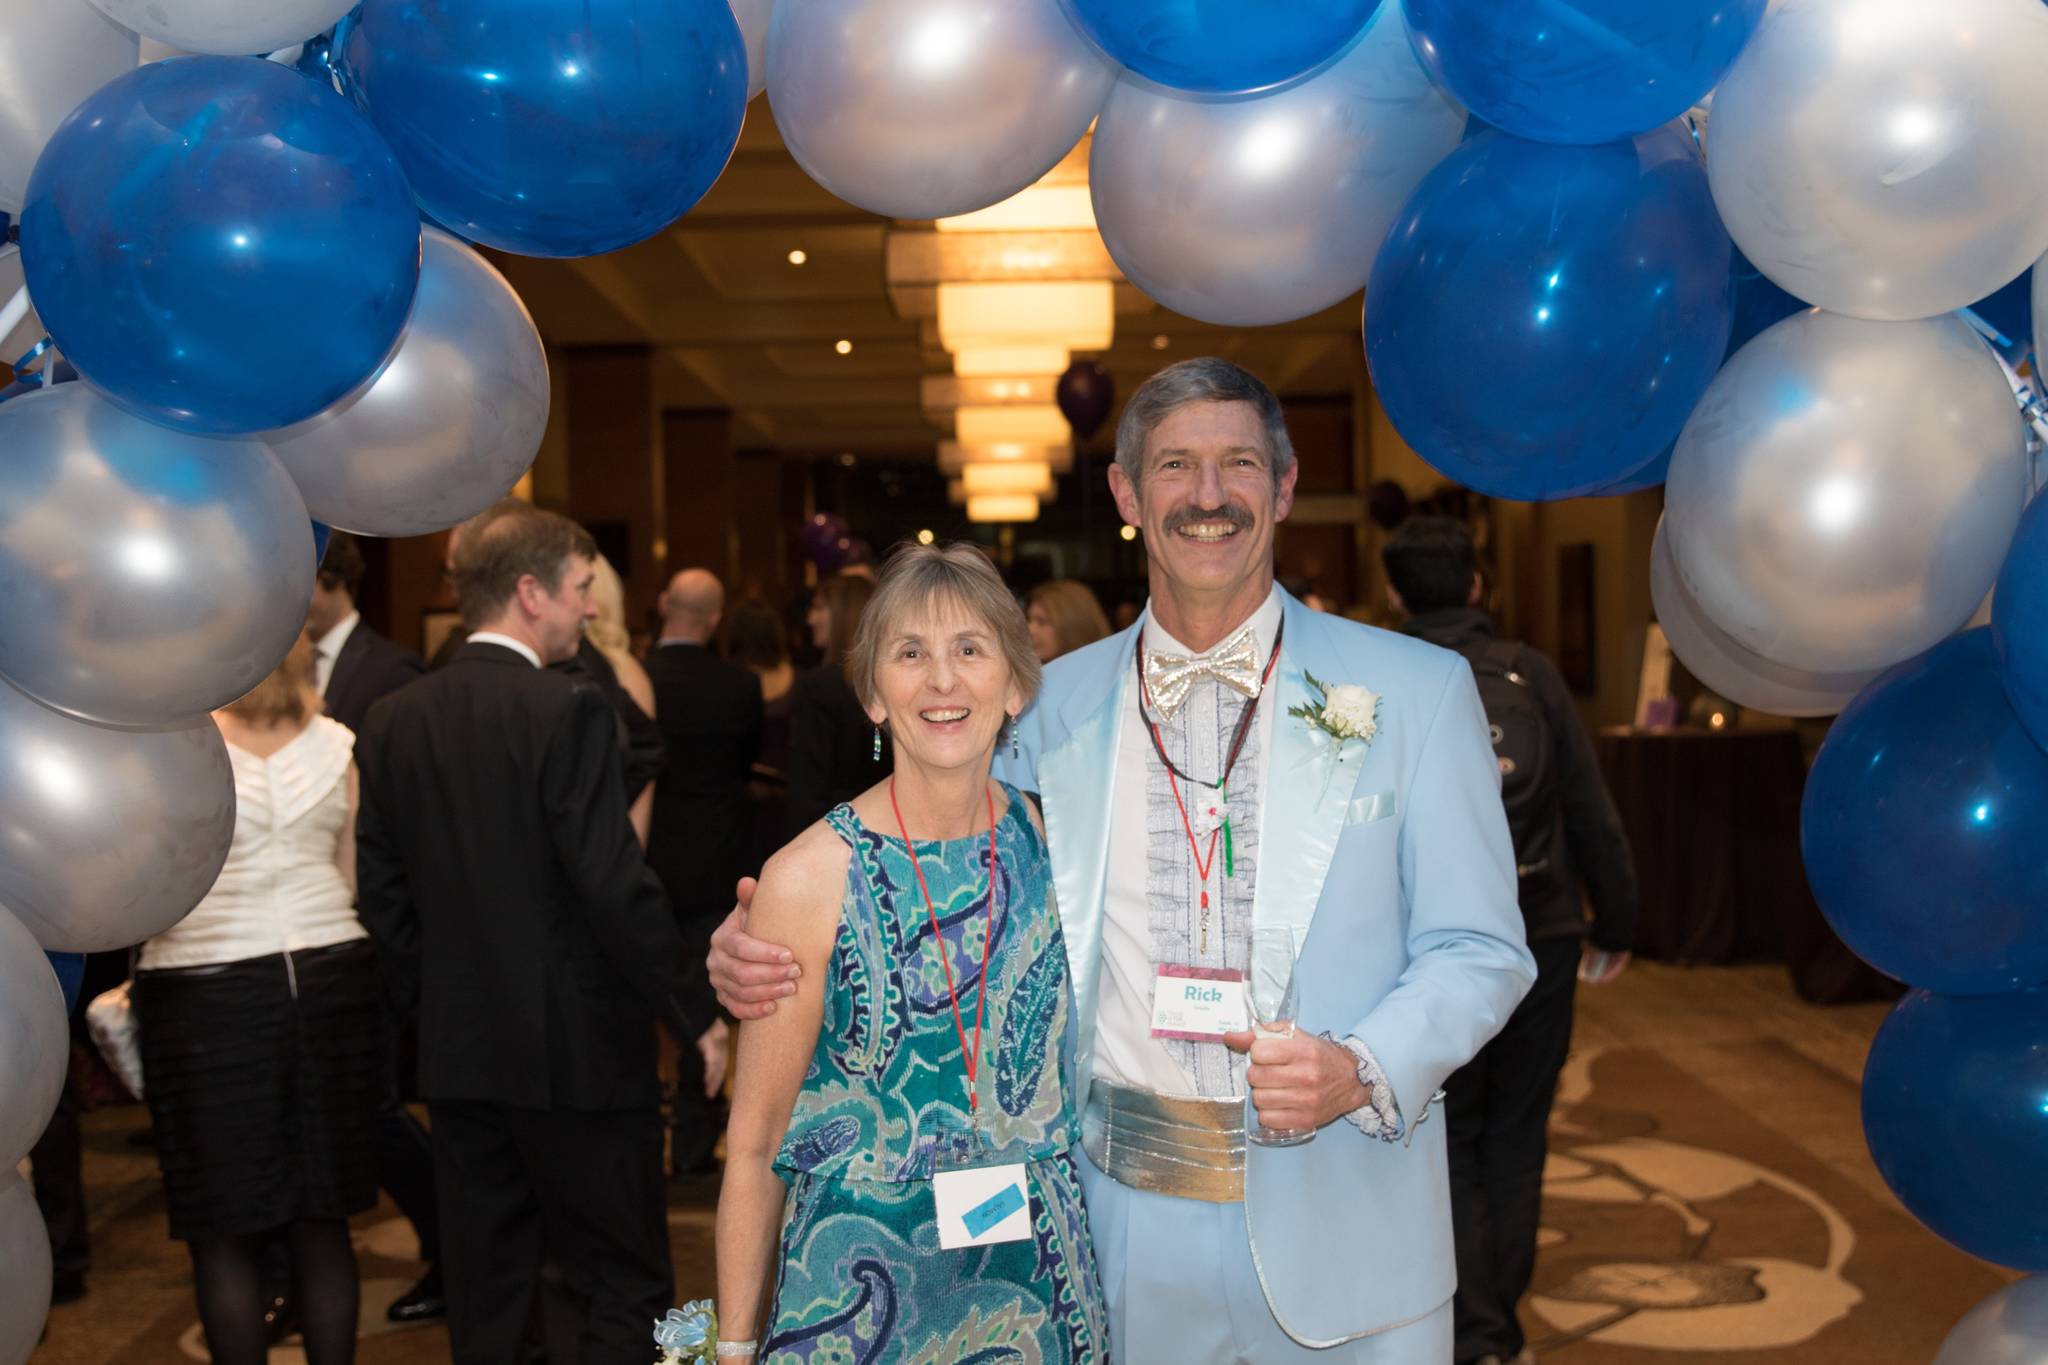 Terry and Rick Colella attend their Friends of FSH Research fundraiser in January, which had a prom theme. Since starting the organization, they have raised more than $3.2 million for muscular dystrophy research. Contributed photo